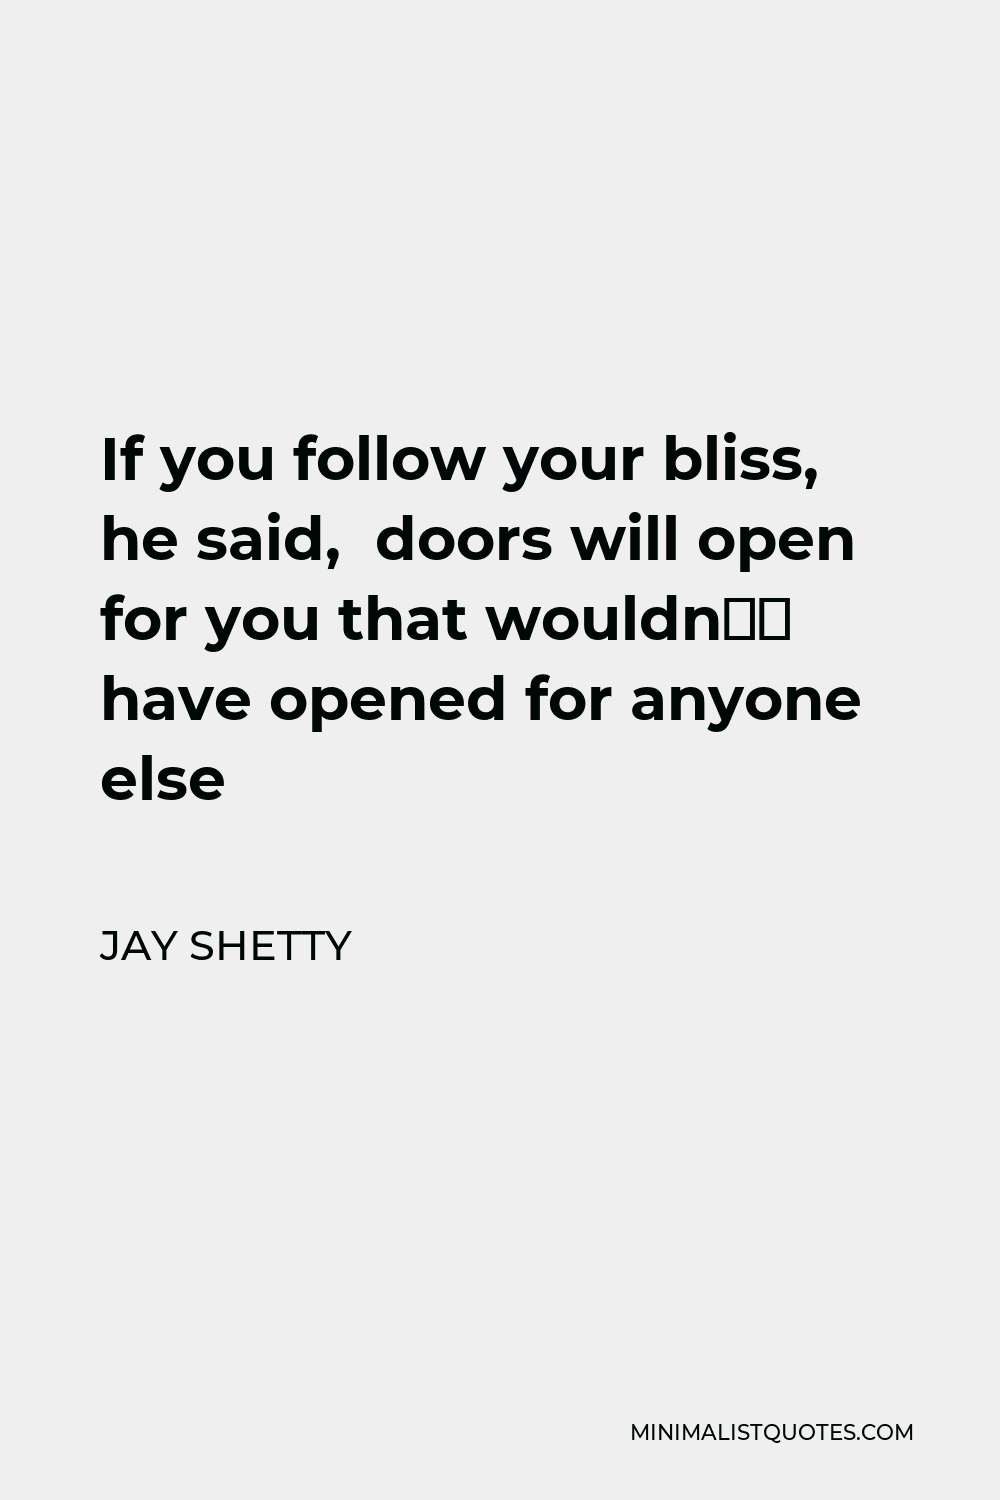 Jay Shetty Quote - If you follow your bliss, he said, doors will open for you that wouldn’t have opened for anyone else